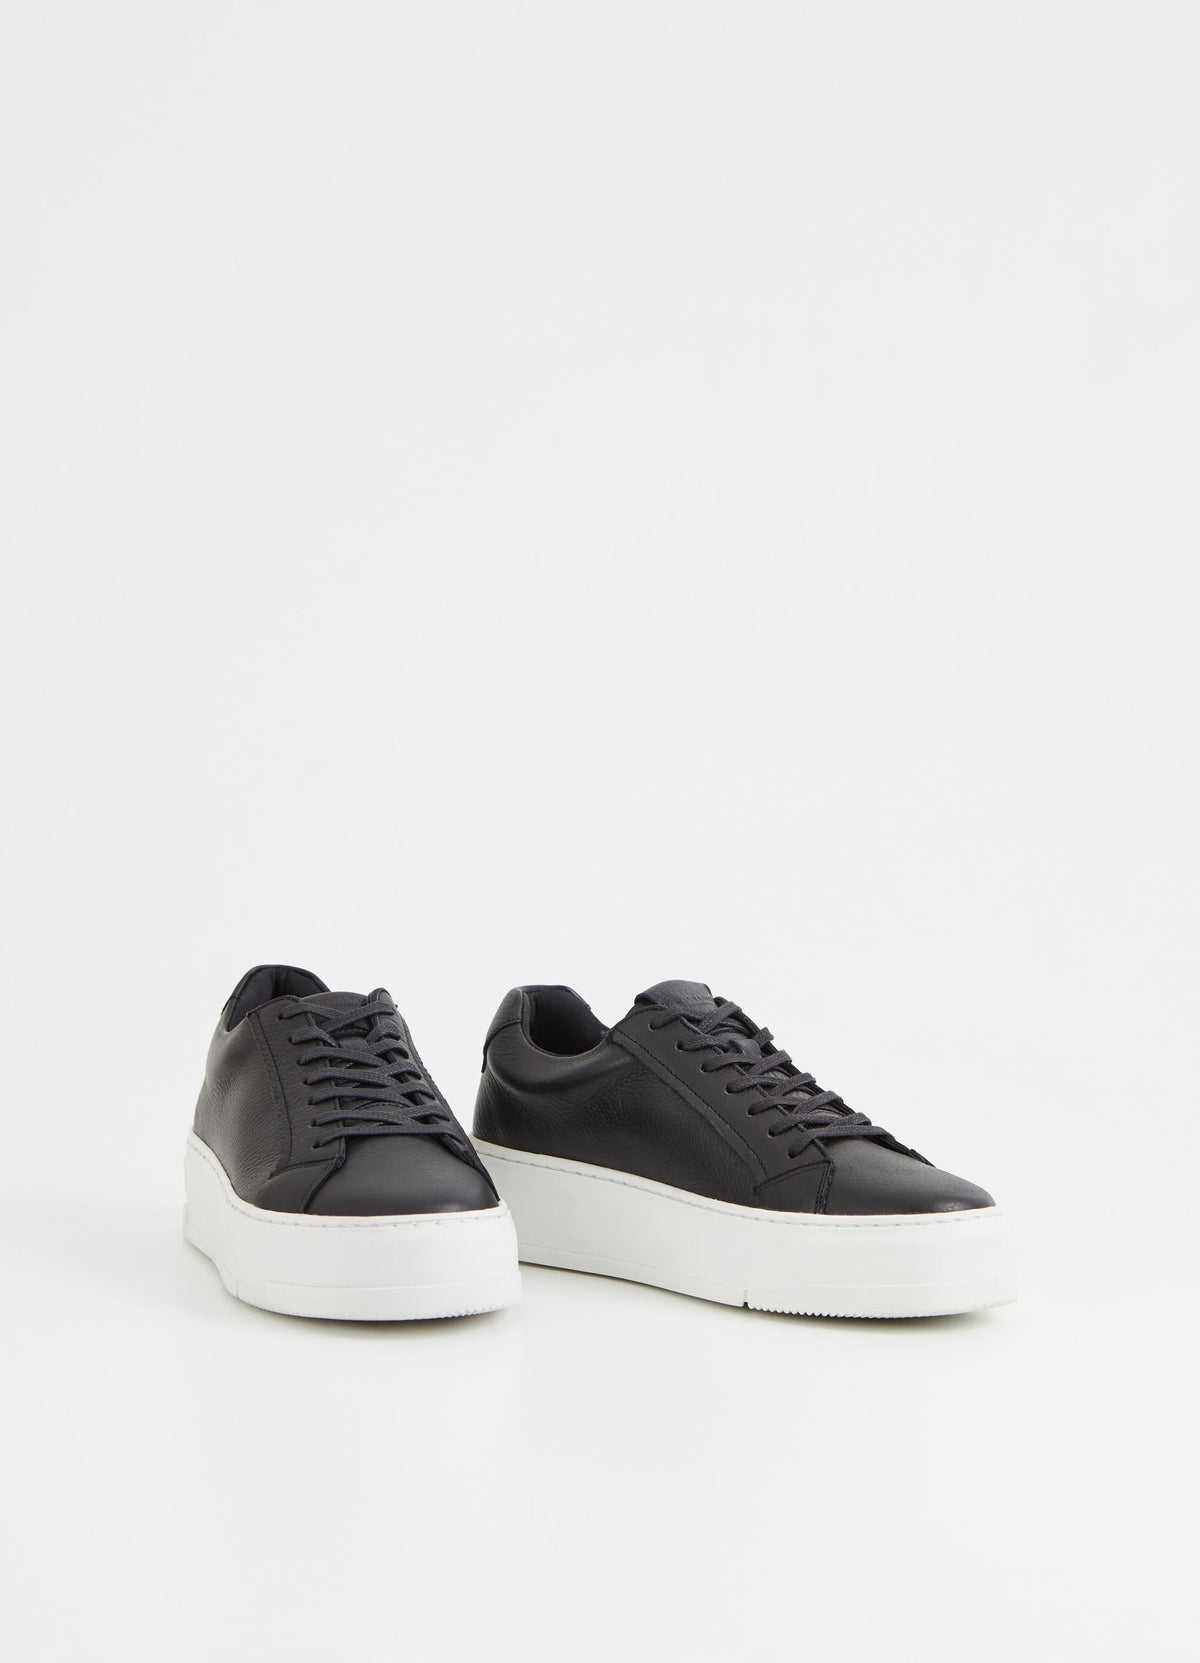 Black leather trainers with white chunky platform sole and heel